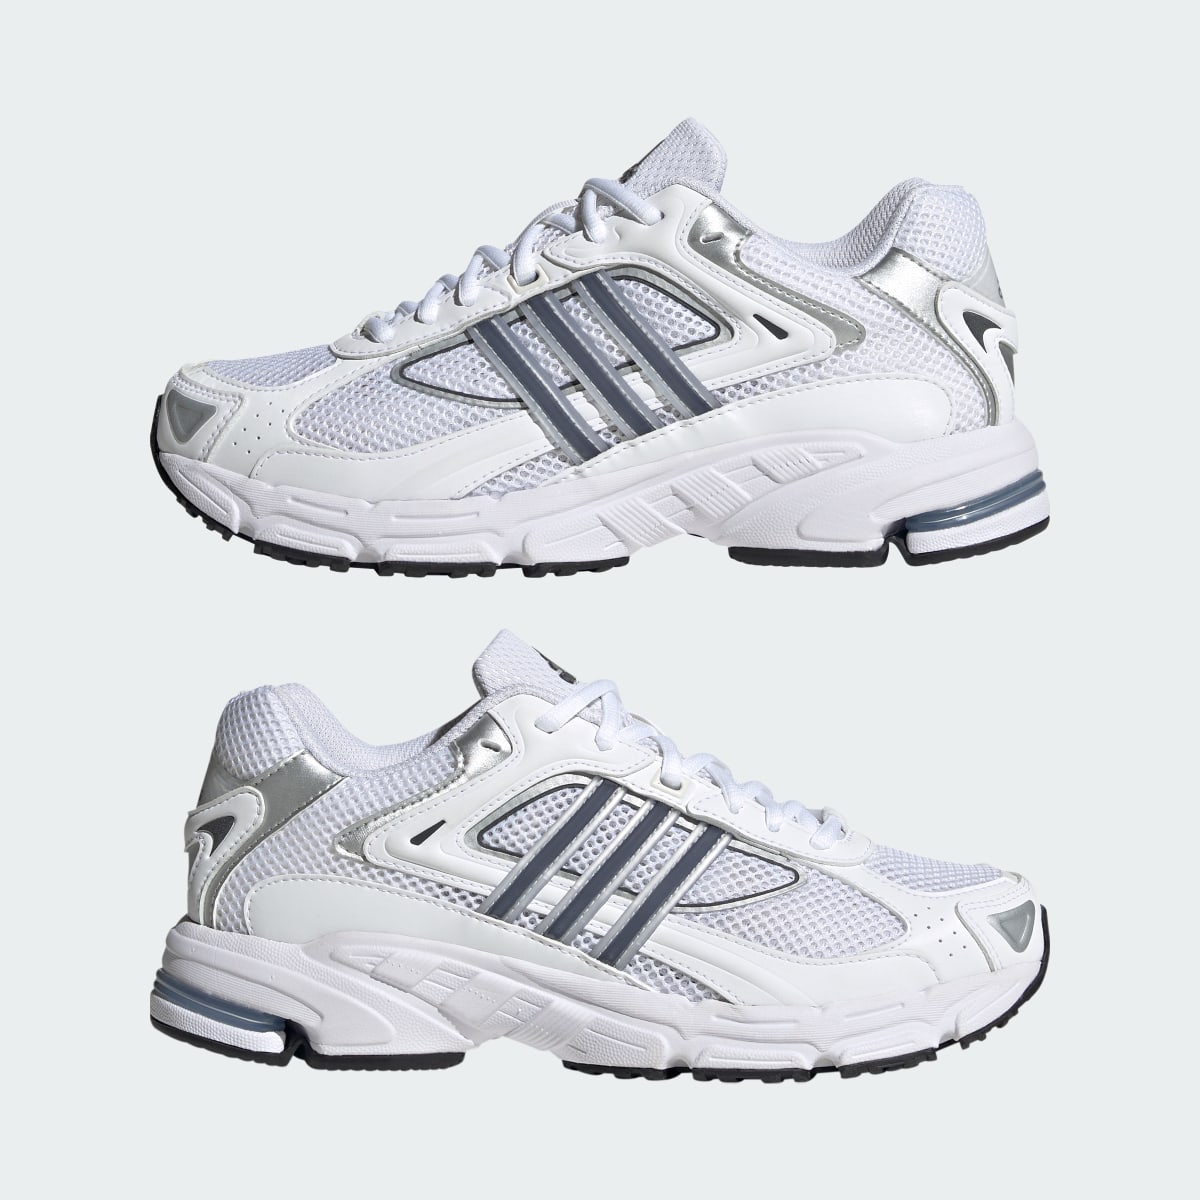 Adidas Chaussure Response CL. 11